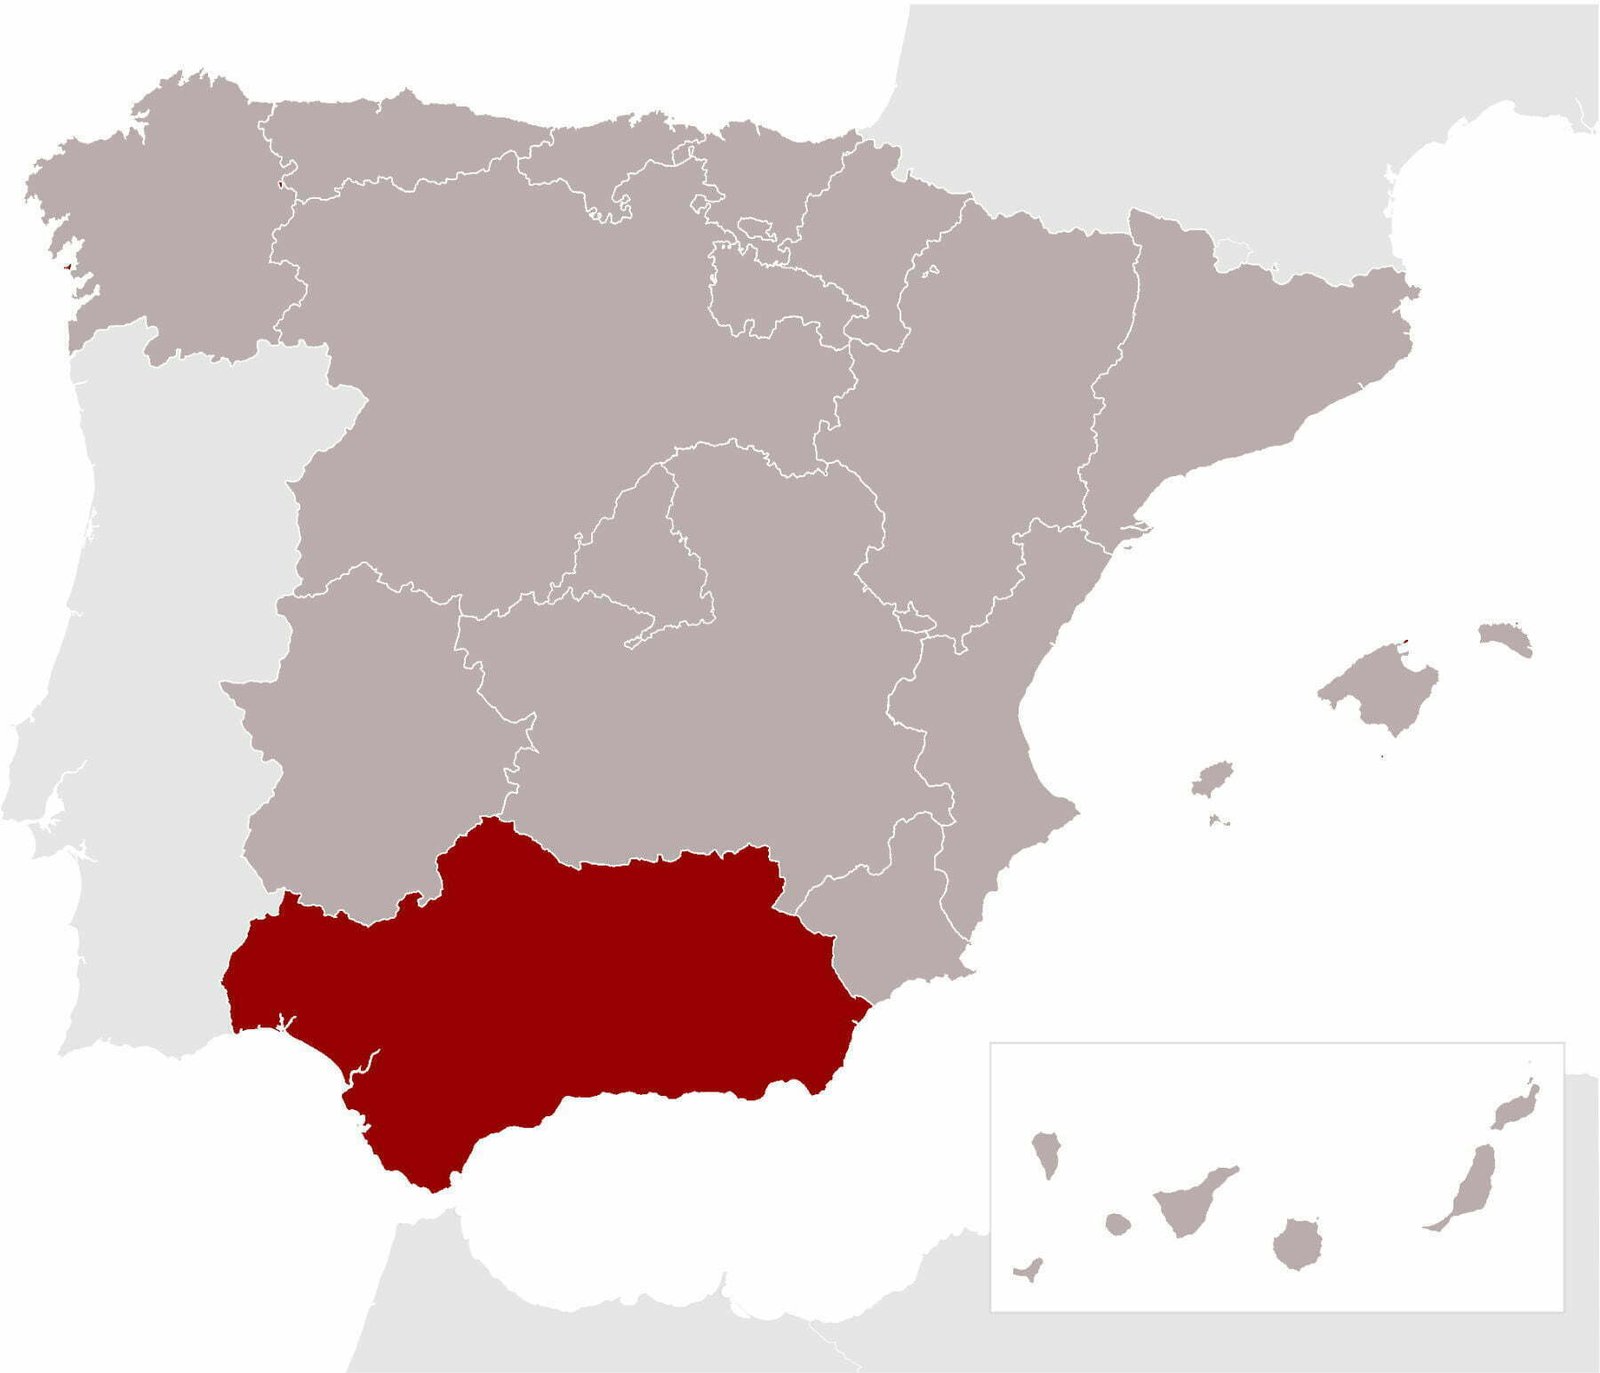 Map of Spain and Portugal with Andalusia highlighted in red